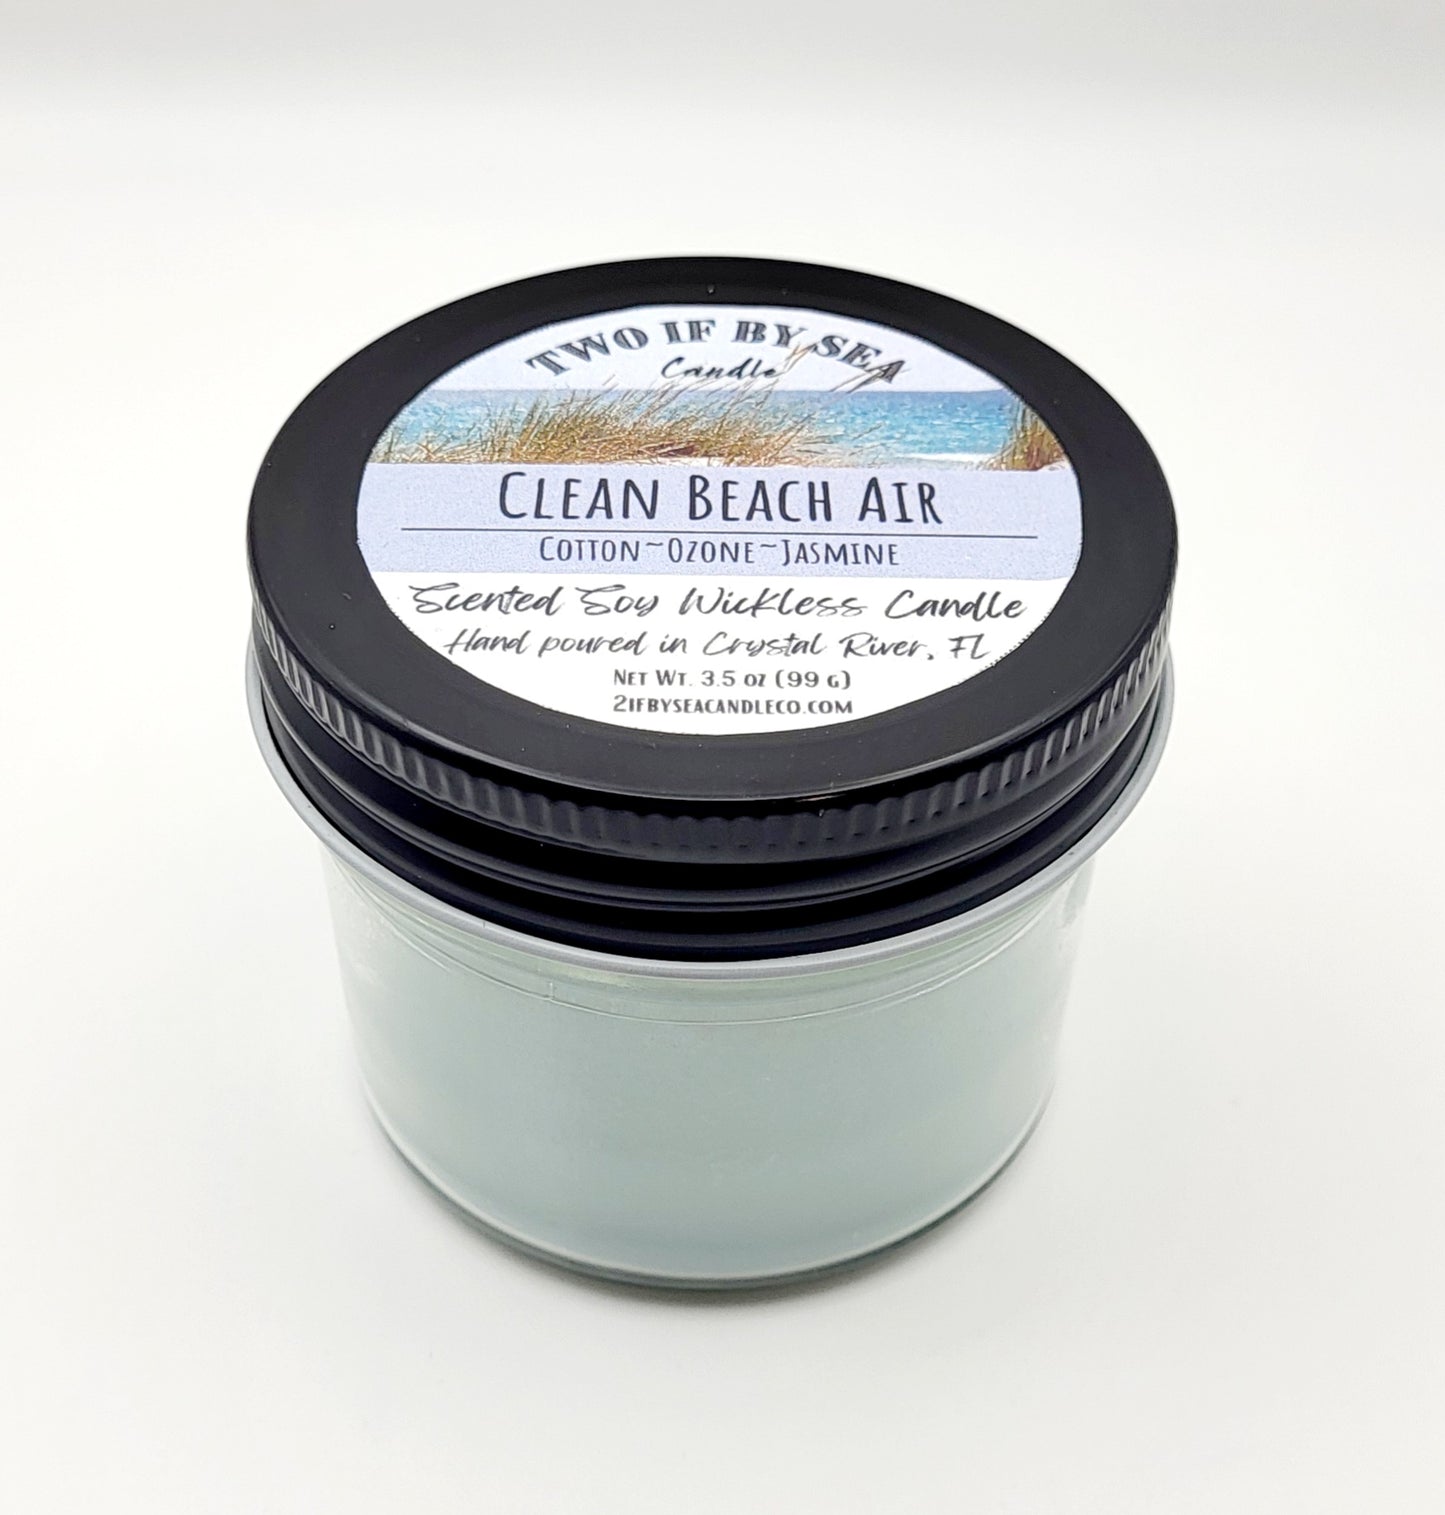 Clean Beach Air Scented Soy/Coconut Candle